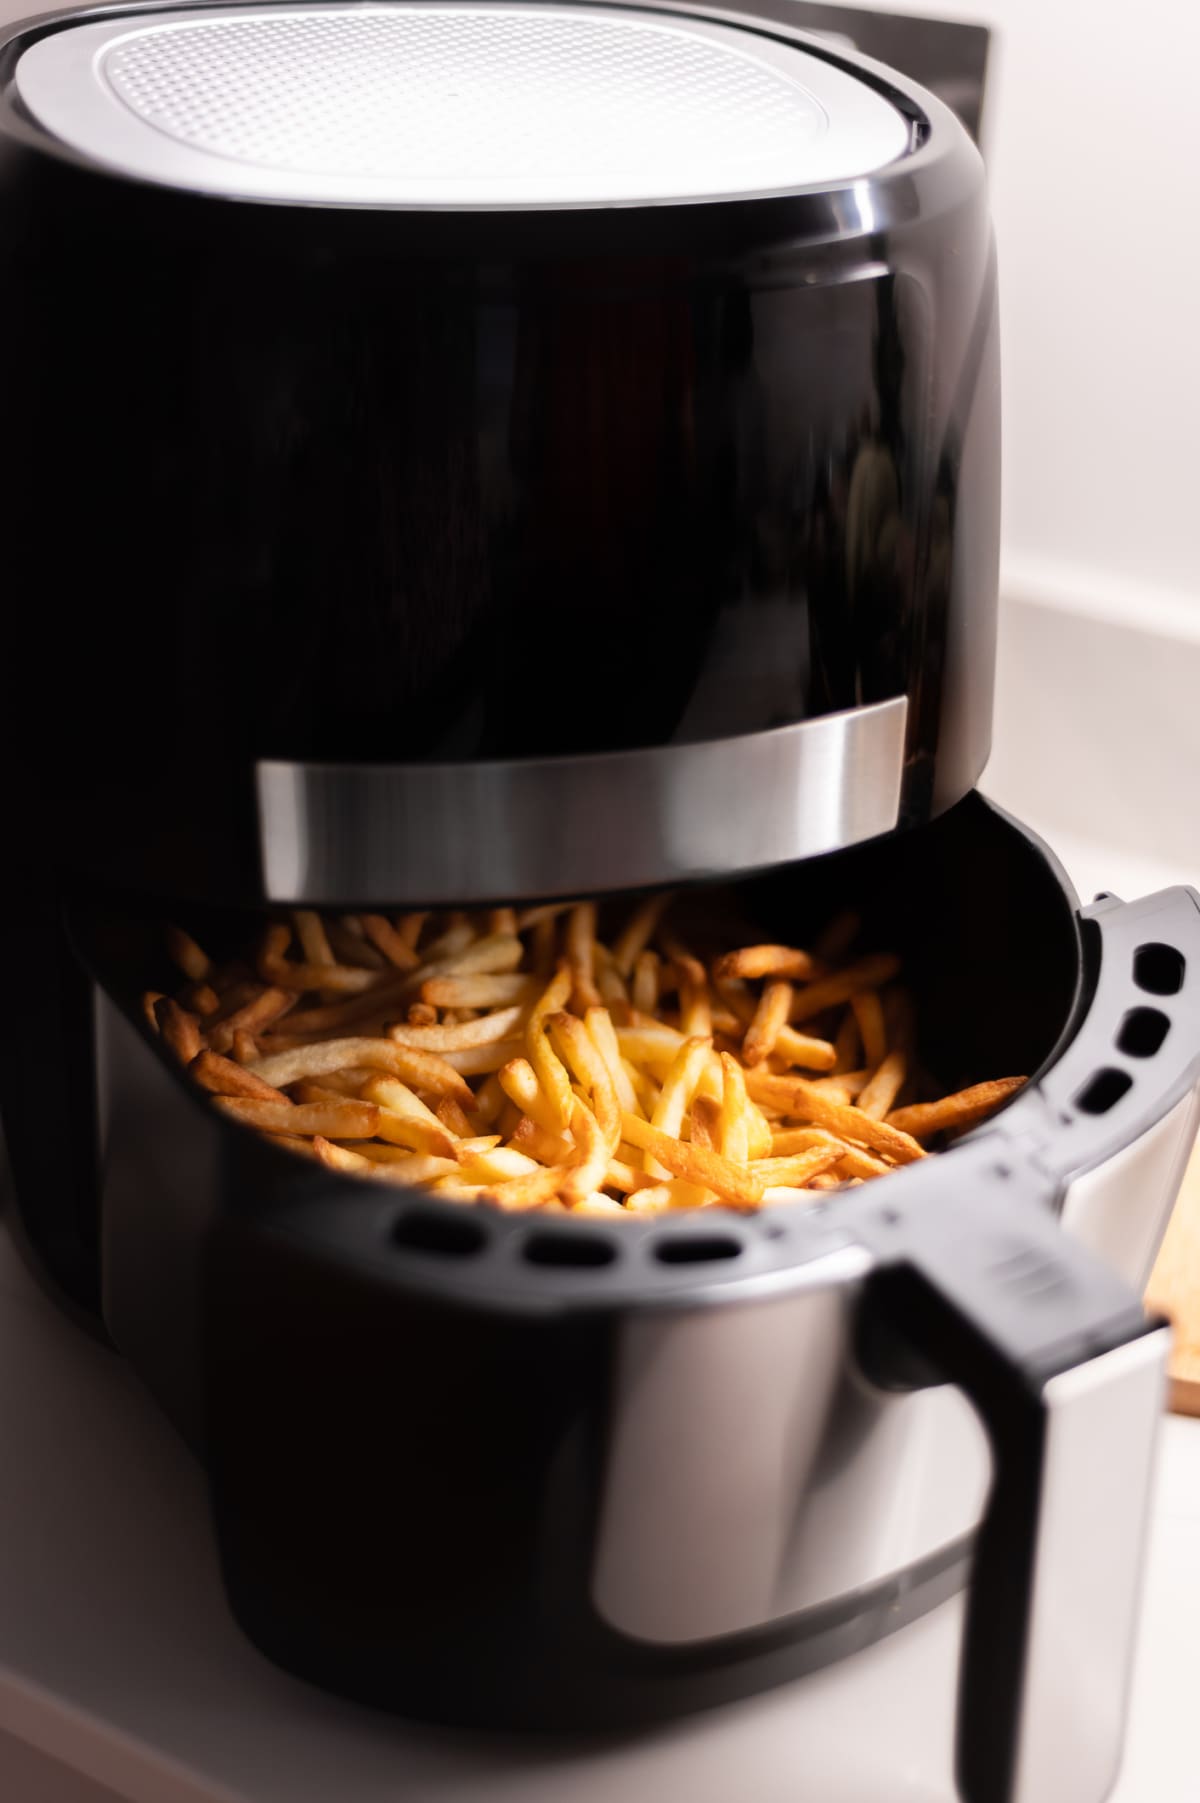 Chips or french fries made in tendy kitchen gadget air fryer, small countertop convection oven, deep fast frying oil free, more healthful way to cook deep-fried food